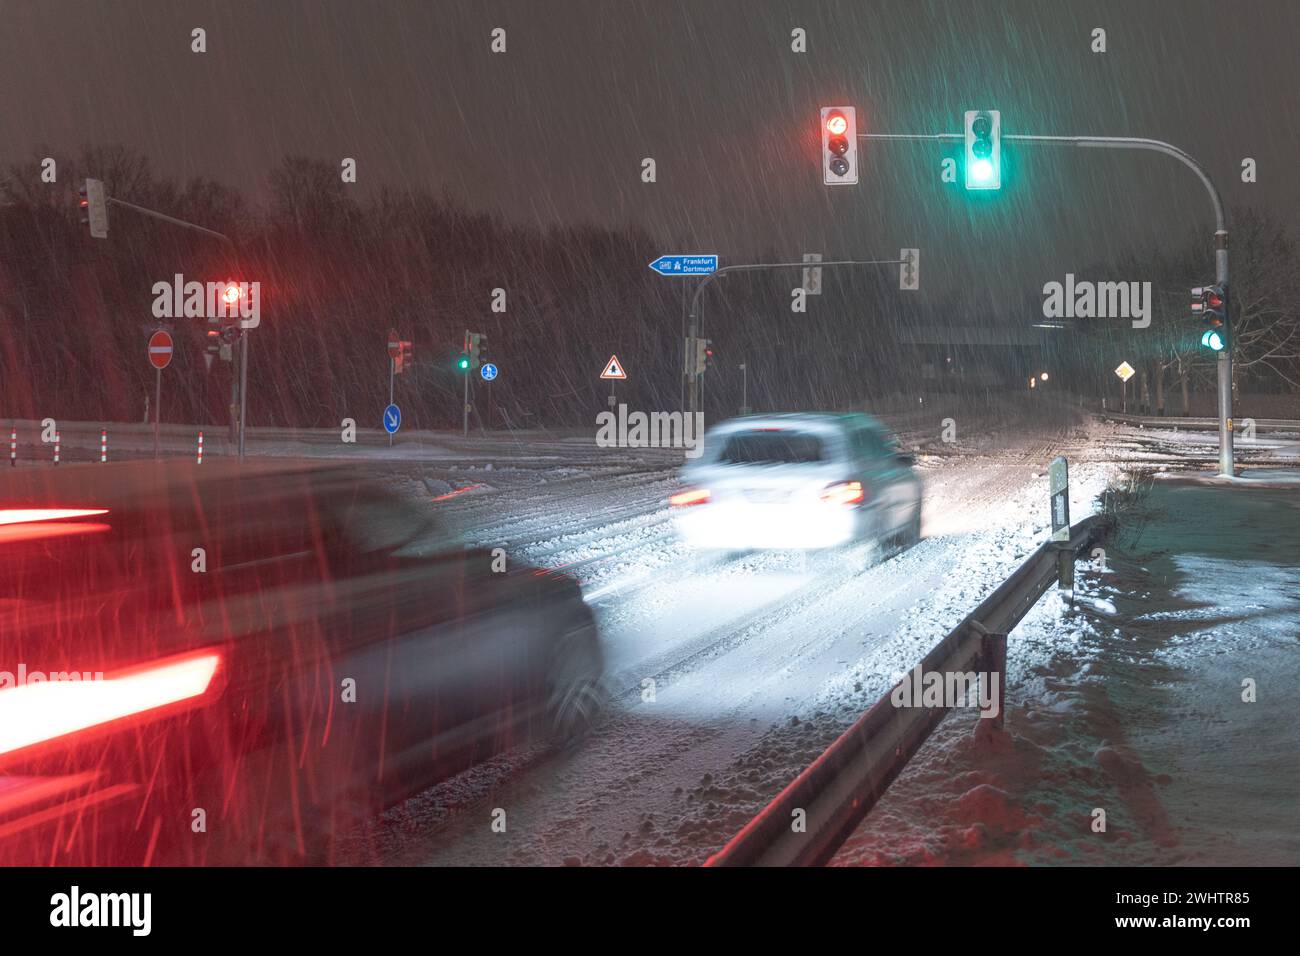 Red and green car lights amid traffic movement Stock Photo